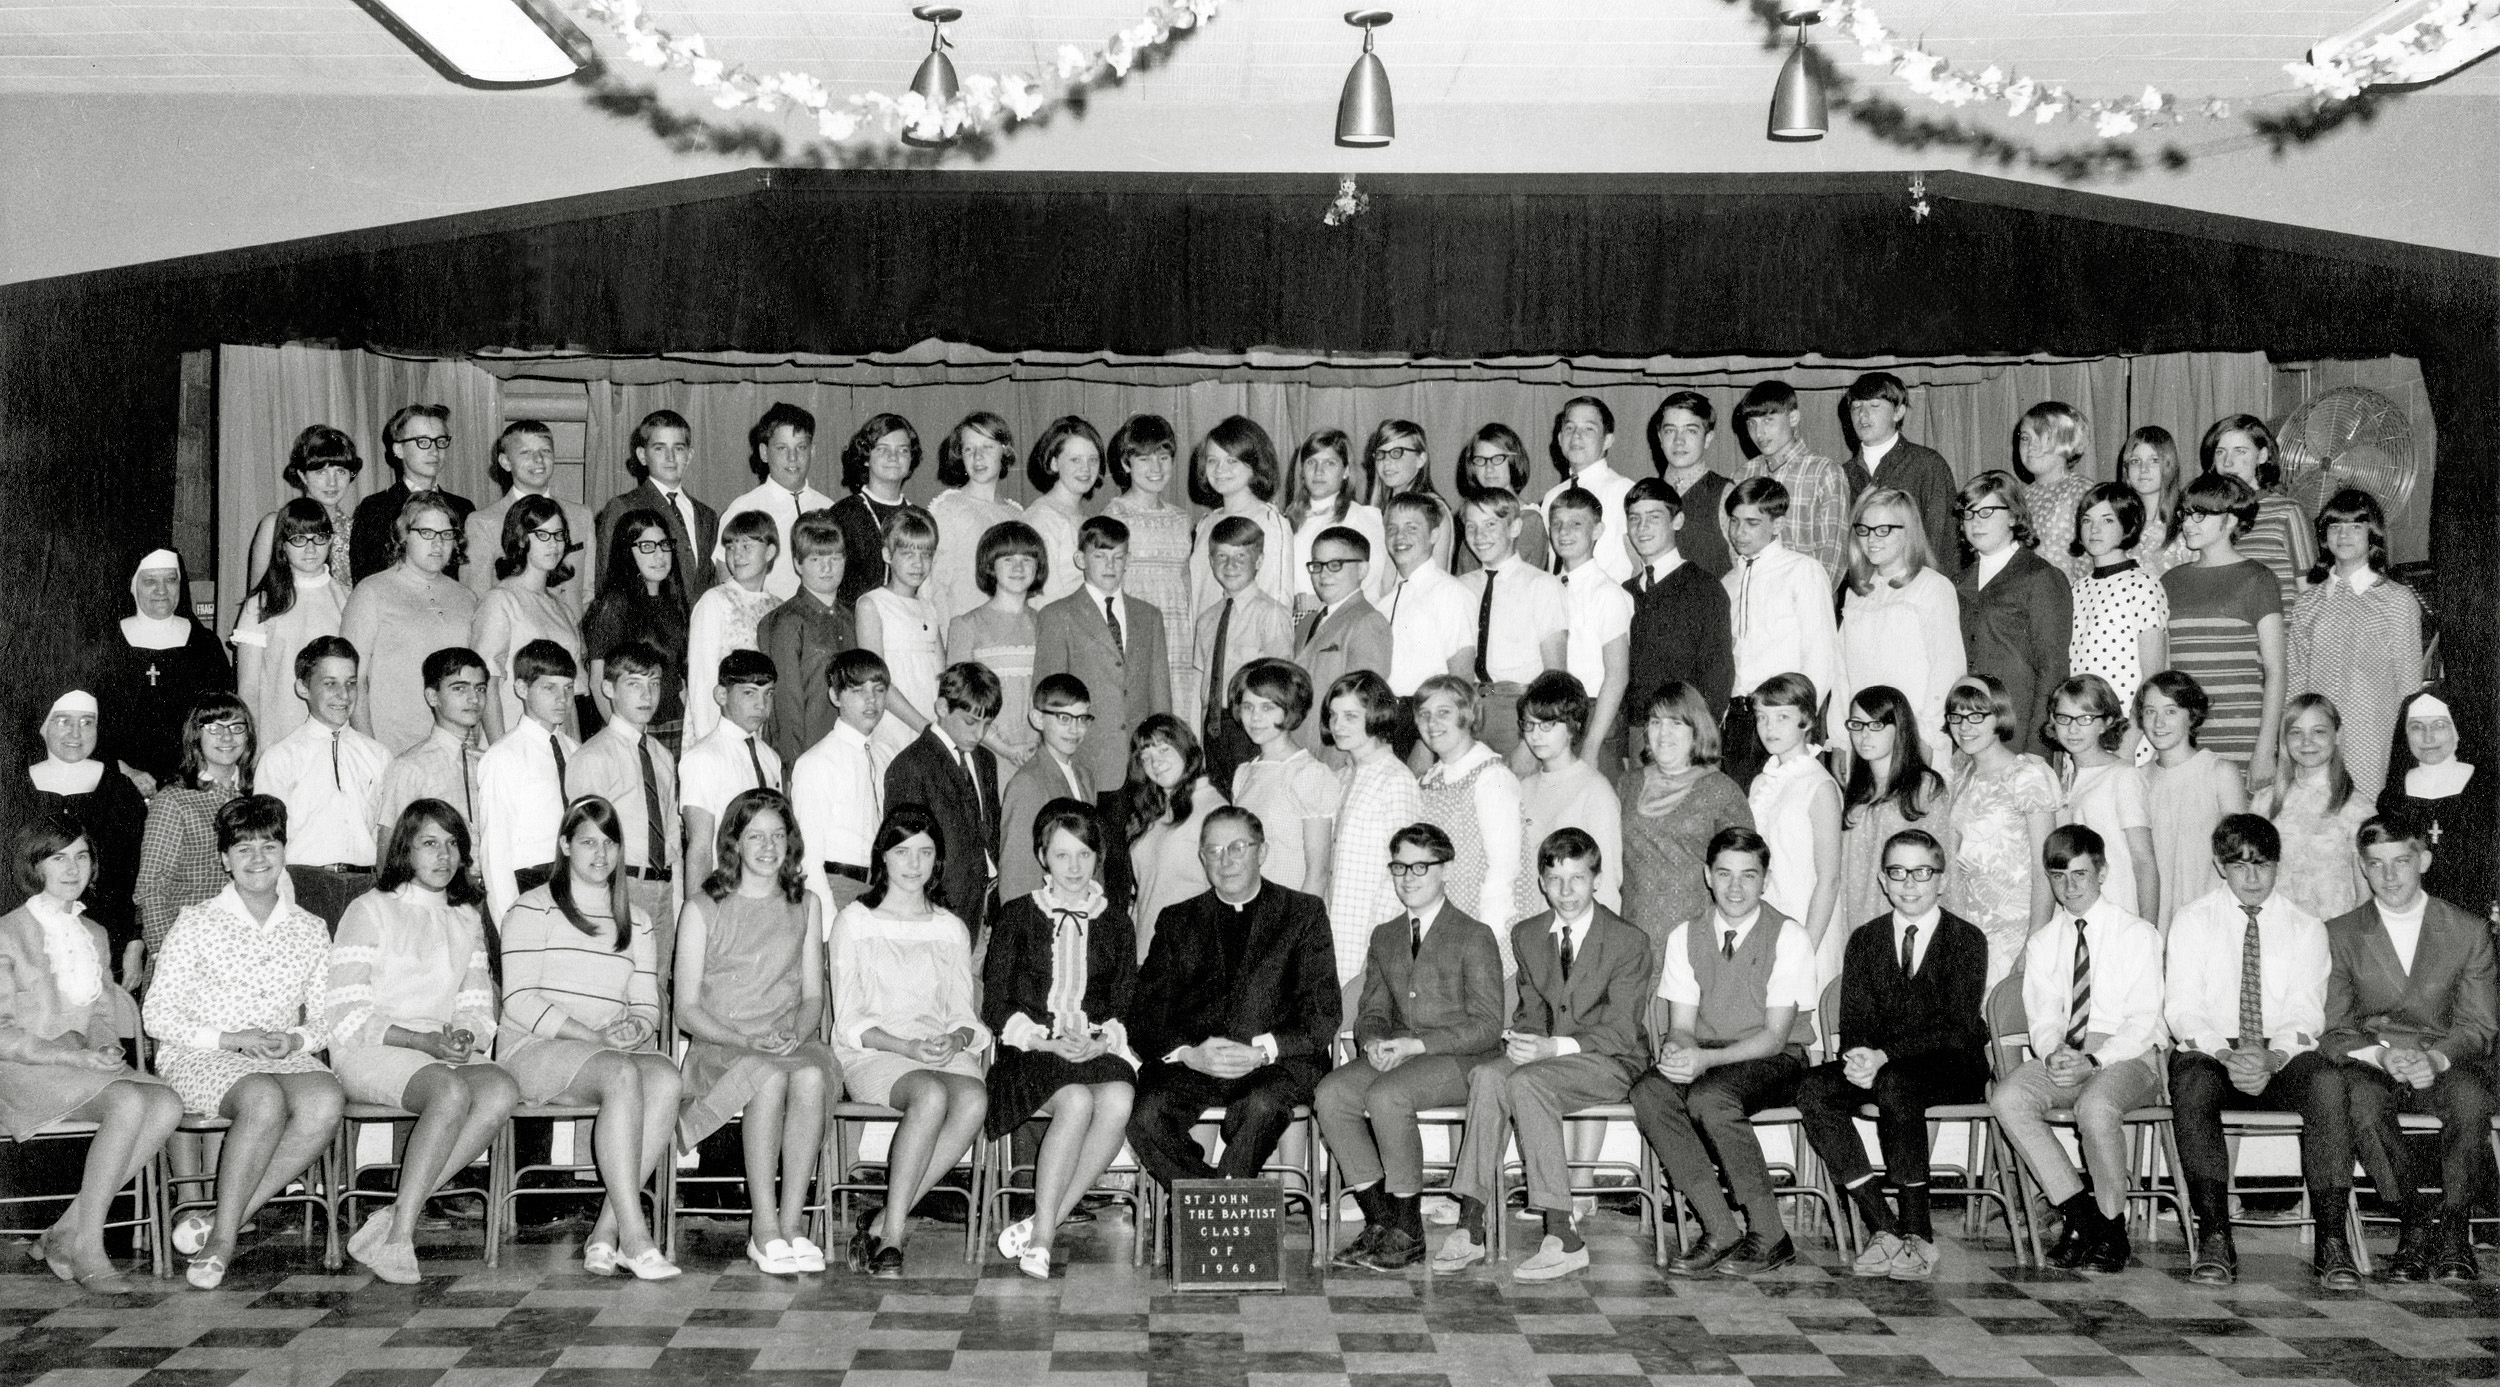 This is the graduation picture for the 8th grade class at St. John the Baptist Catholic School in New Brighton, Minnesota (a suburb of St Paul). I'm in the second row from the front, fourth from the left. 

This was one of the few days each year when we weren't required to wear our uniforms (but I inexplicably still wore the stupid string tie!)

Reverend Paul Koscielniak, who ran the school from its inception in 1952, is front and center.

My biggest surprise, when scanning this image, was seeing what appears to be mistletoe hanging above center stage. Wish I had seen and taken advantage of it back then! View full size.